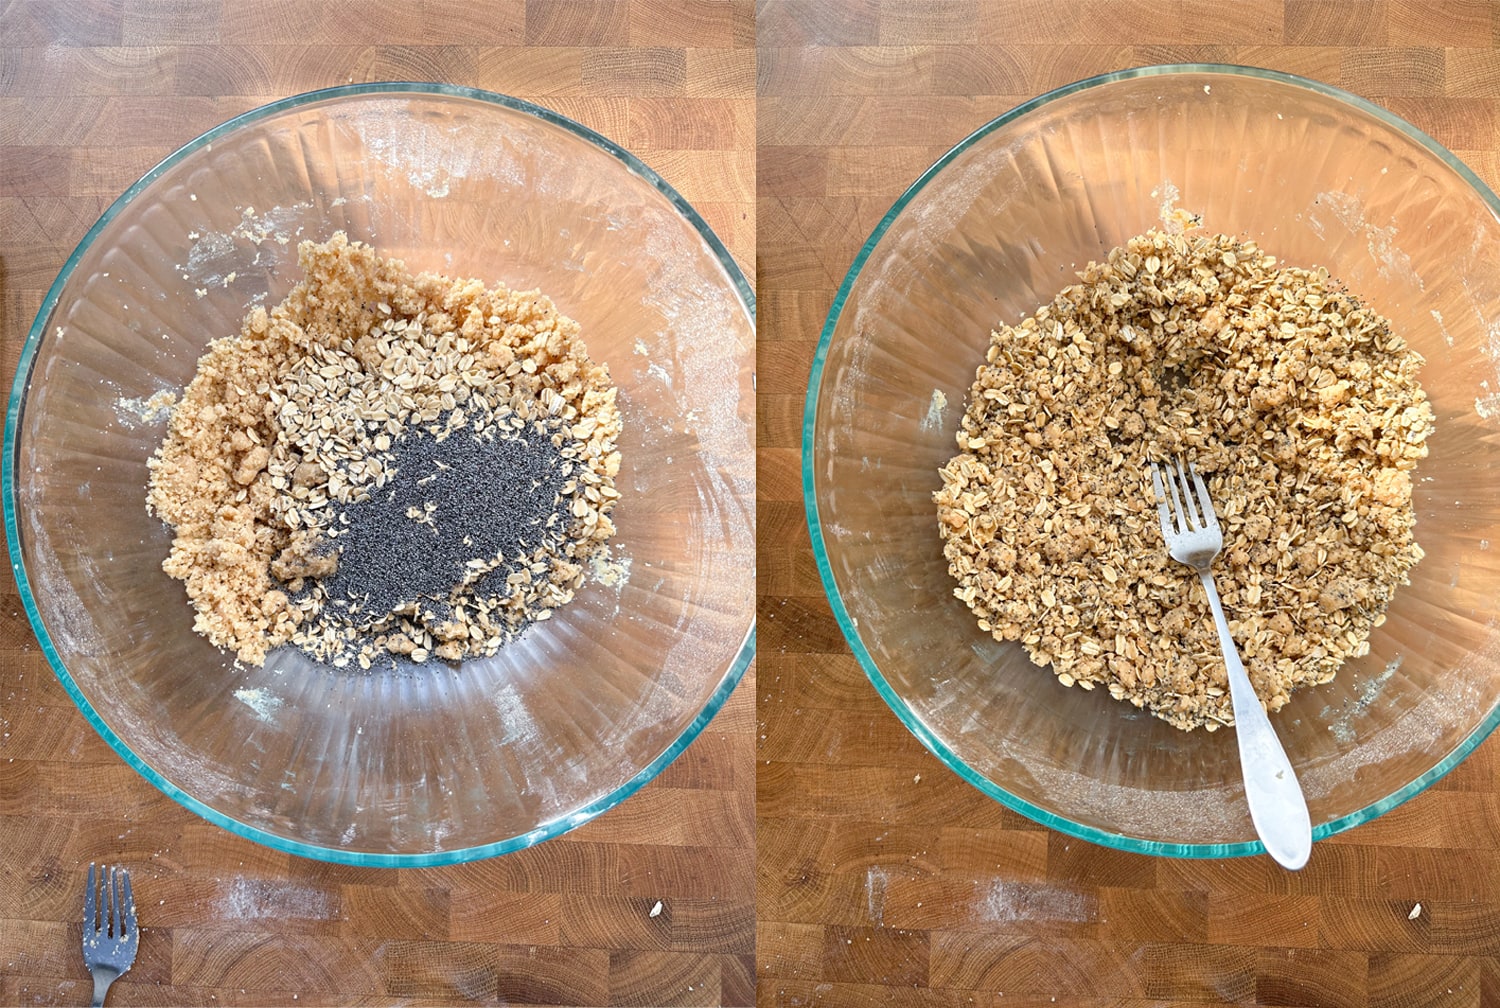 Process of mixing the remaining bar base dough with poppyseeds and oats.